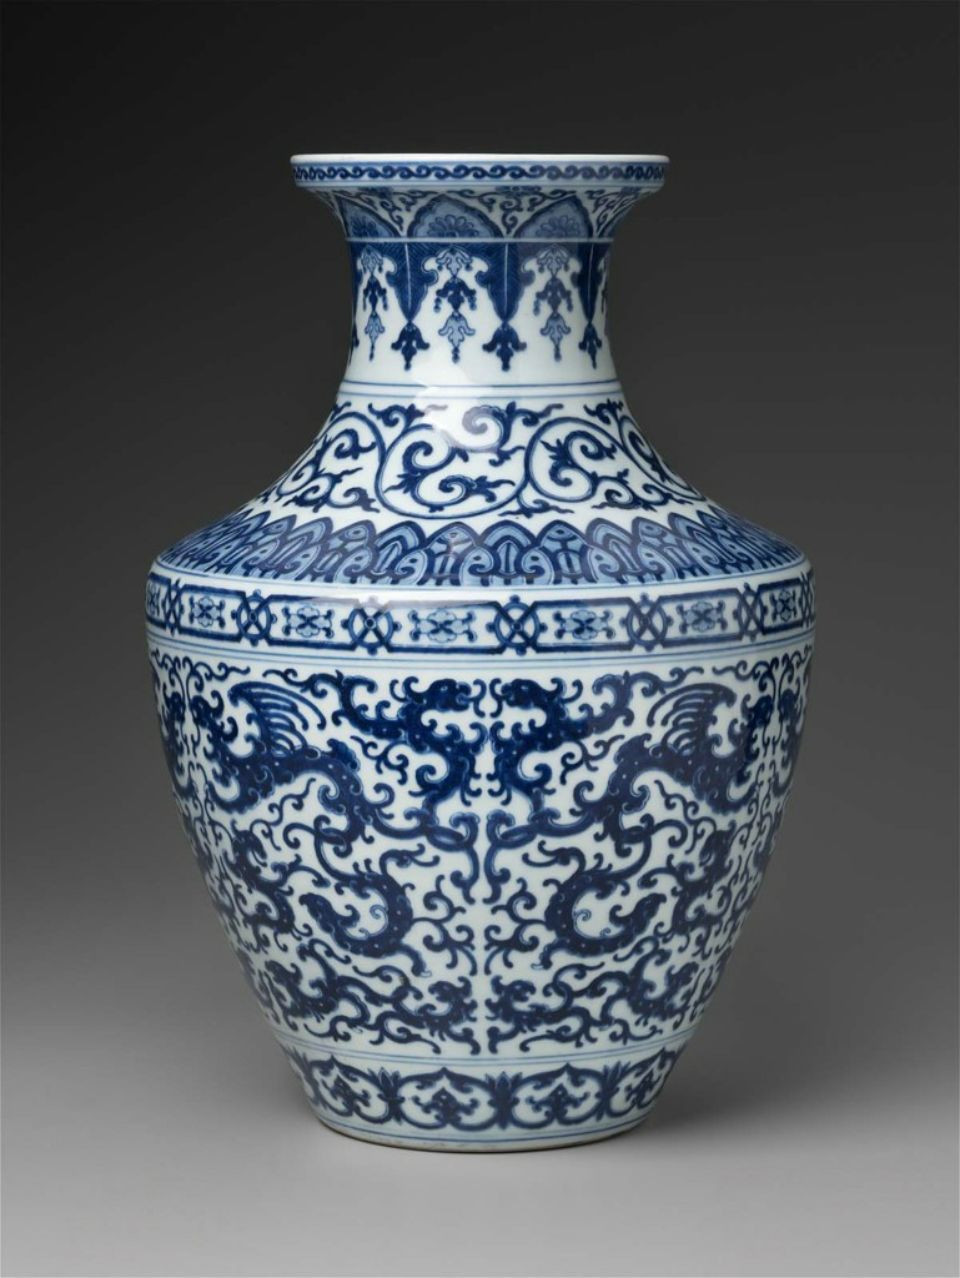 17 attractive Blue and White Floral Ceramic Vase 2024 free download blue and white floral ceramic vase of vase with blue white phoenix winged dragons chinese qing inside vase with blue white phoenix winged dragons chinese qing dynasty qianlong period 1736 95